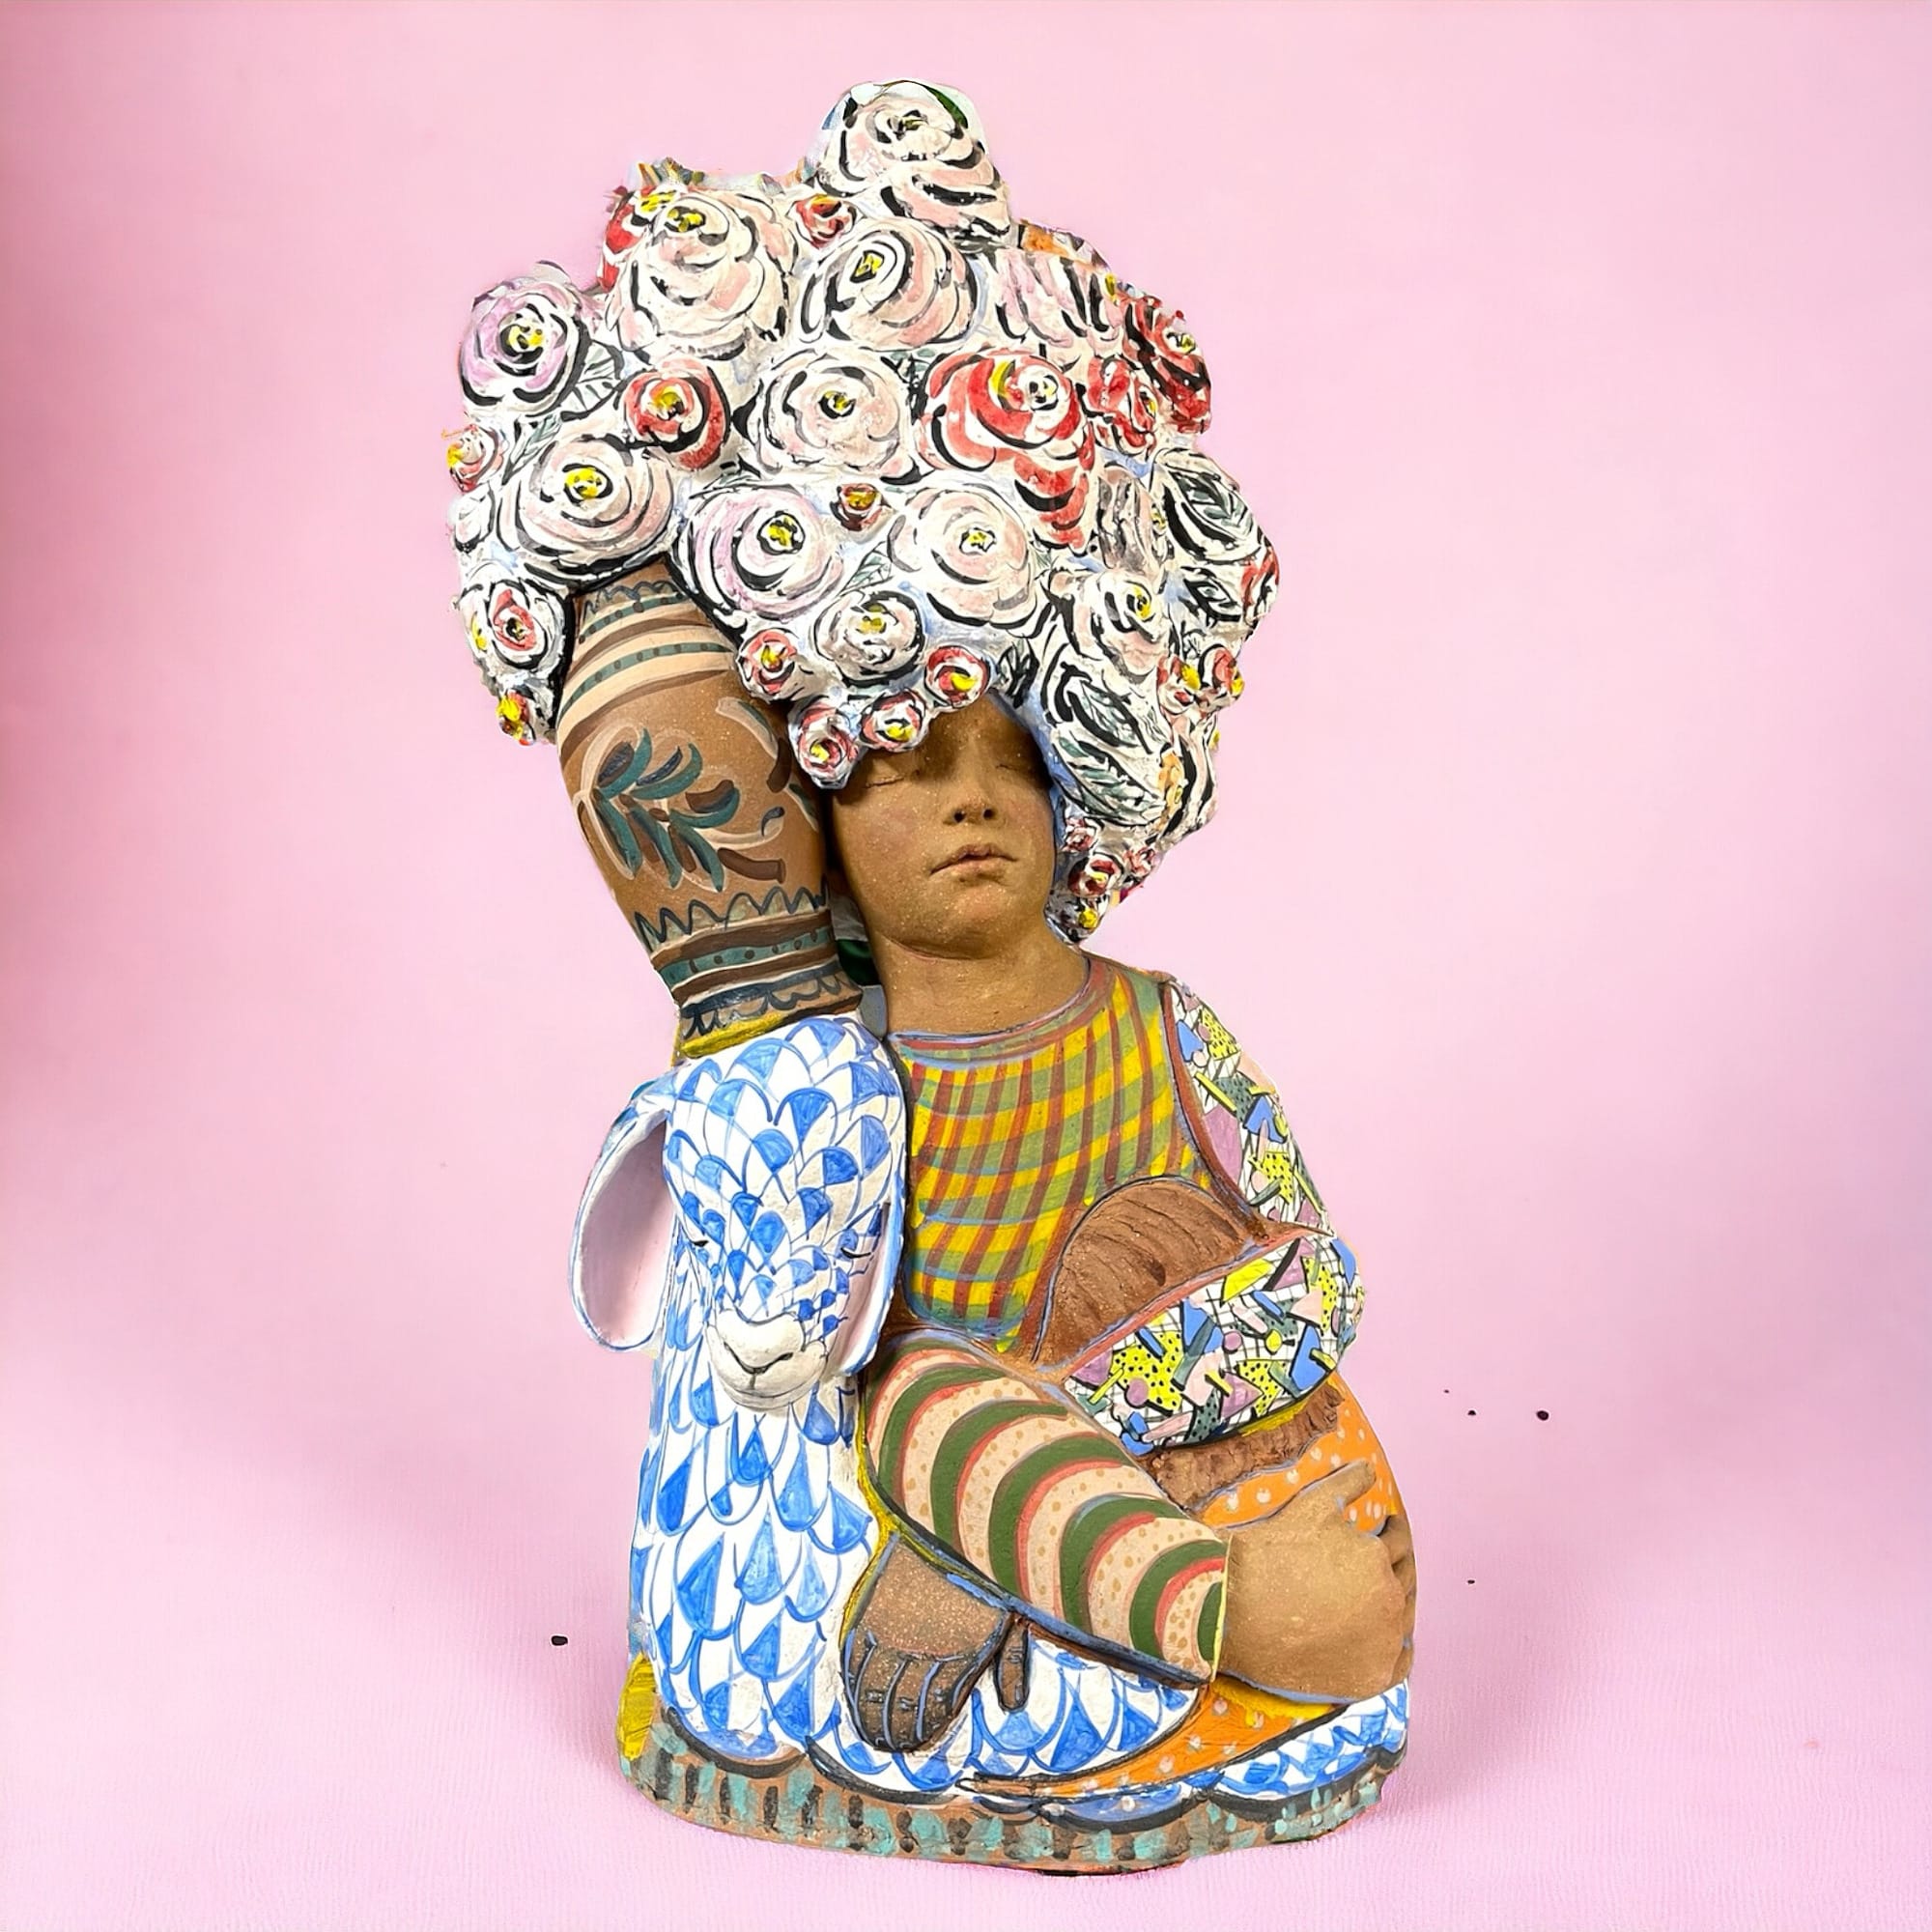 a ceramic sculpture of a figure with its eyes closed, embracing both a lamb and another individual. a throng of flowers covers the top of the composition.